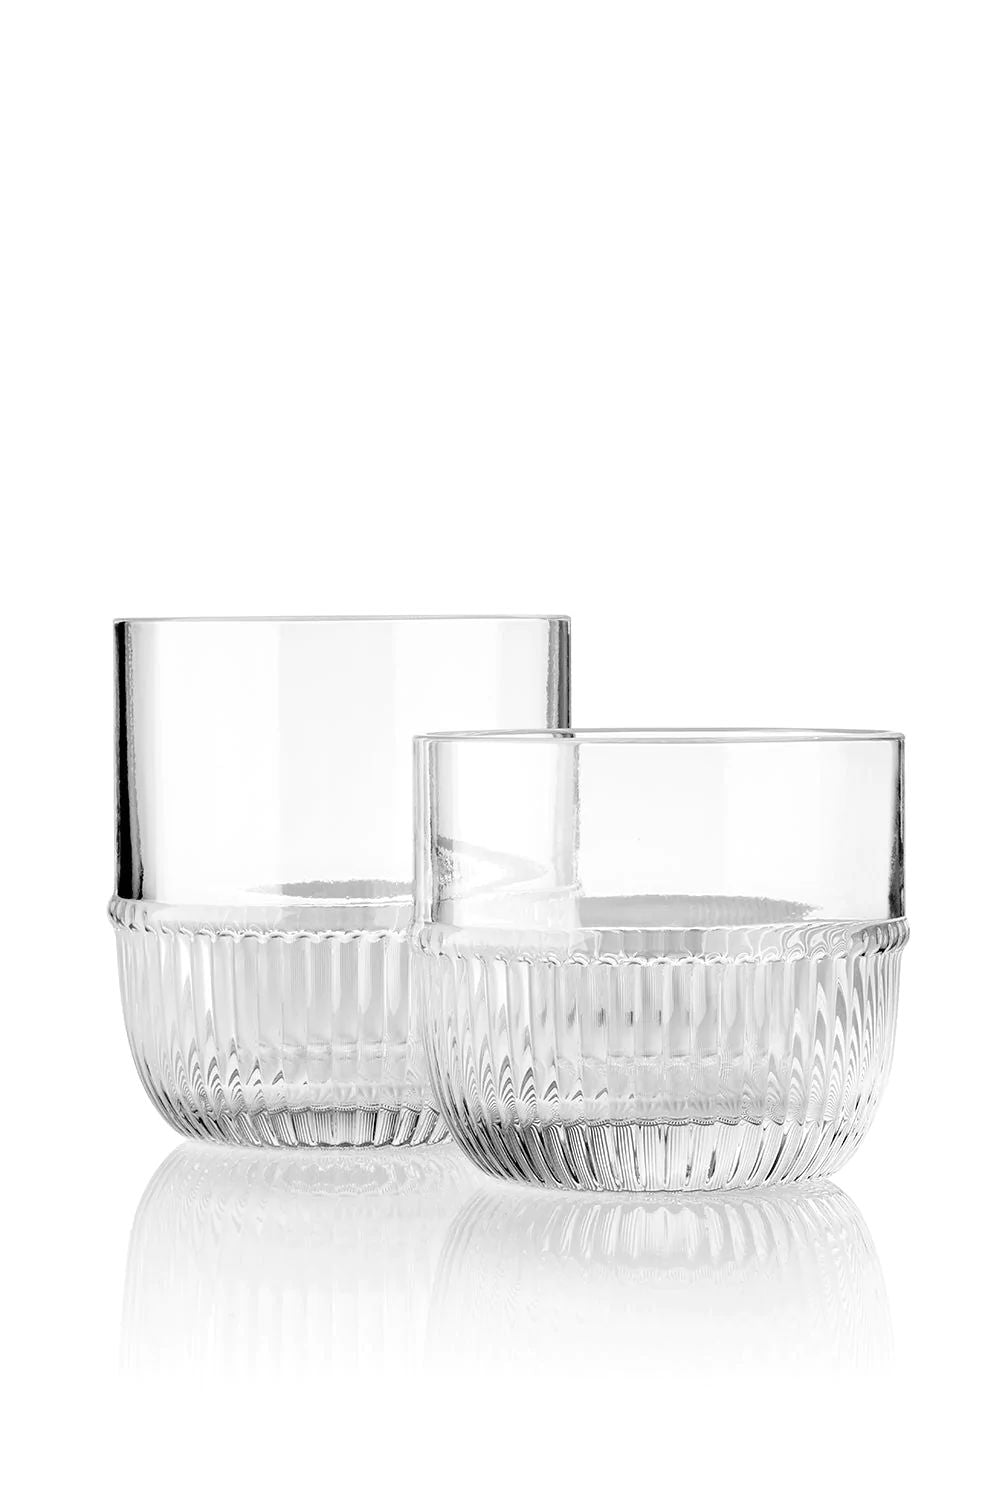 Malling Living Piting Glass Large, Clear